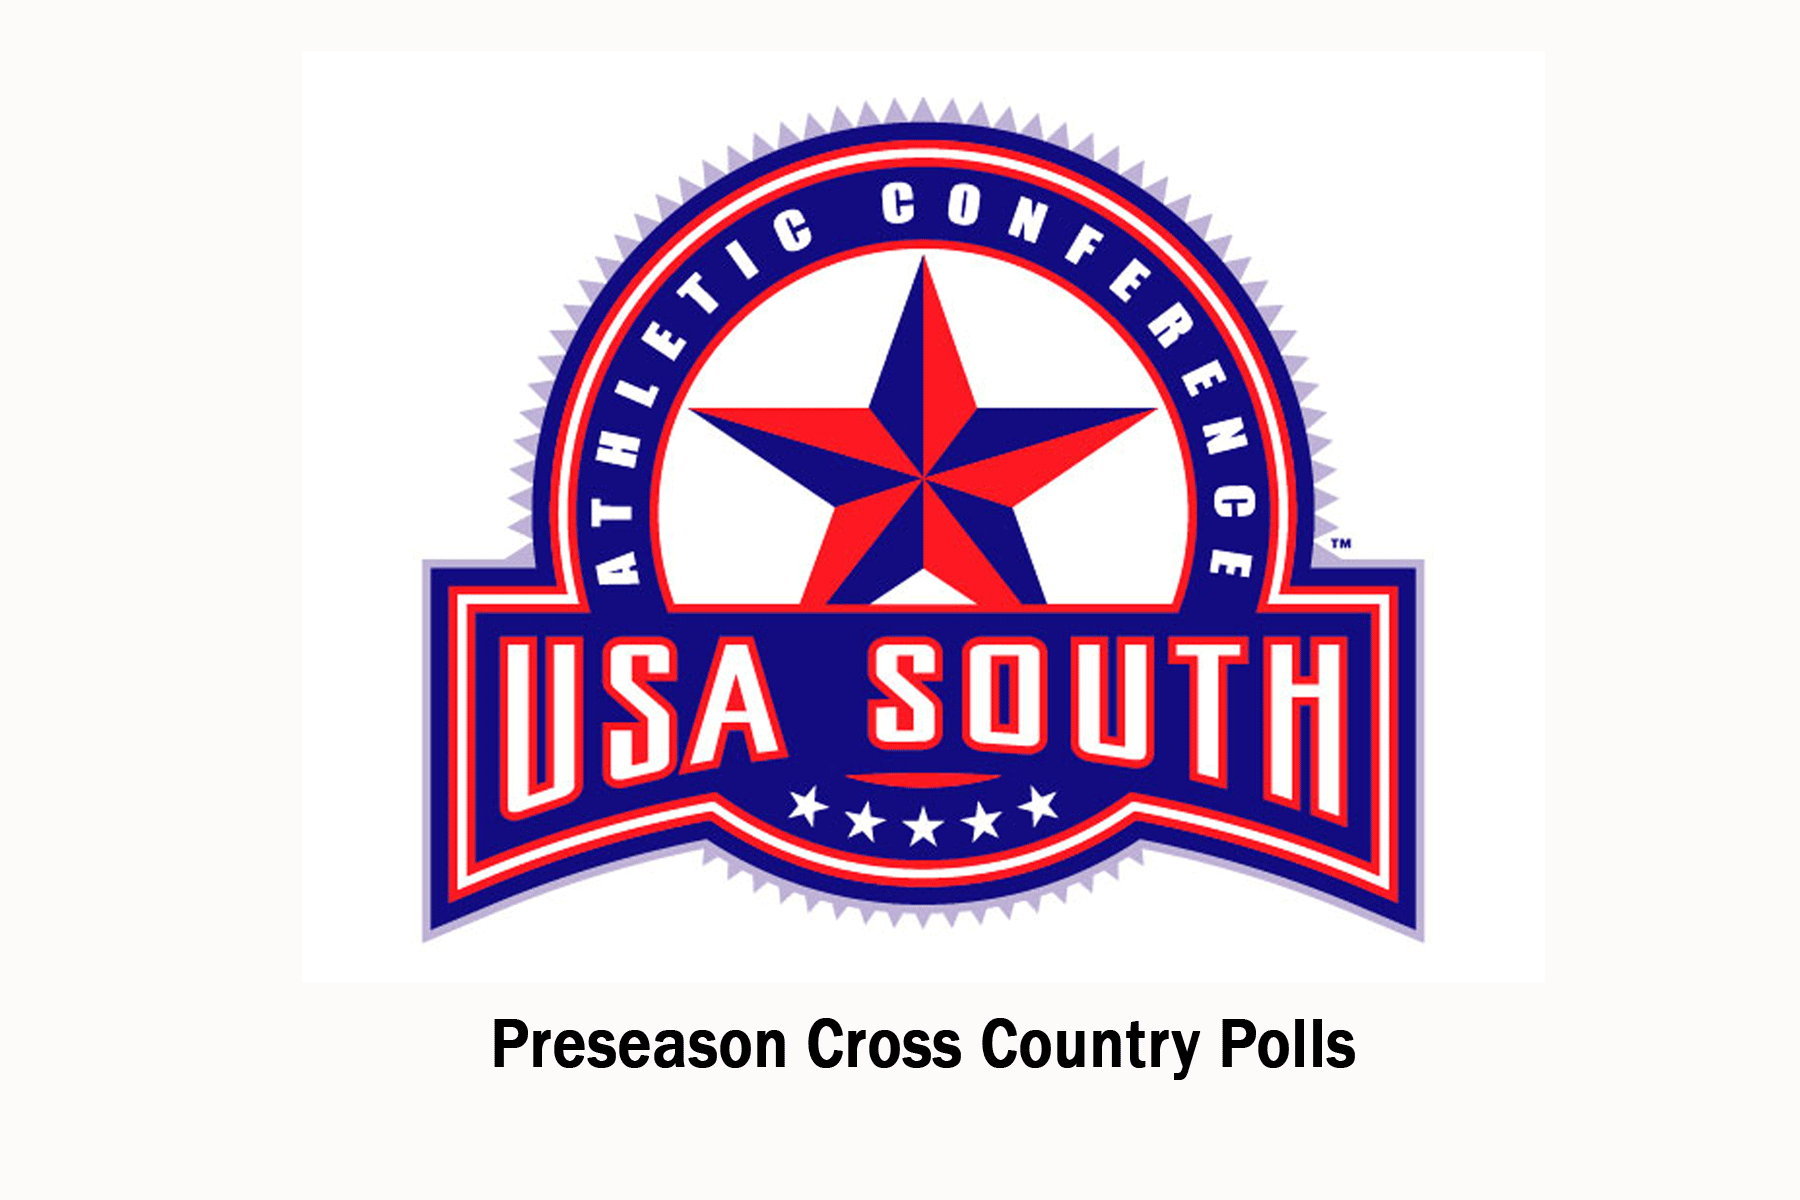 USA South releases preseason cross country polls